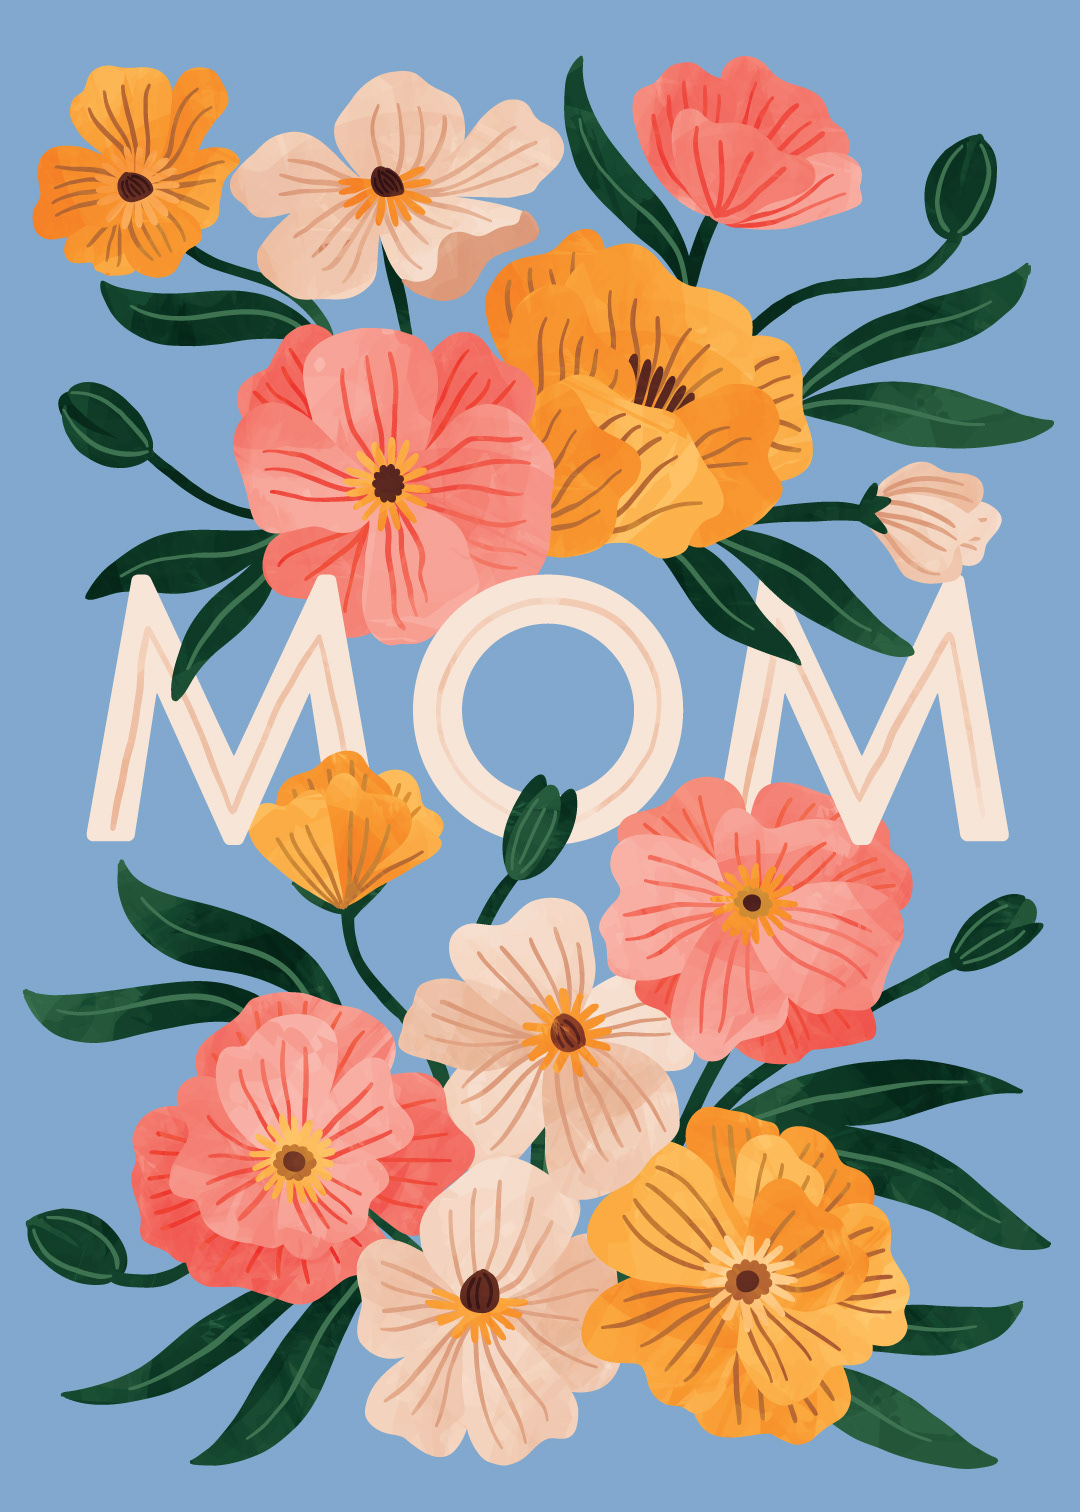 Mother's day greeting card with floral watercolors and "Mom" sentiment.